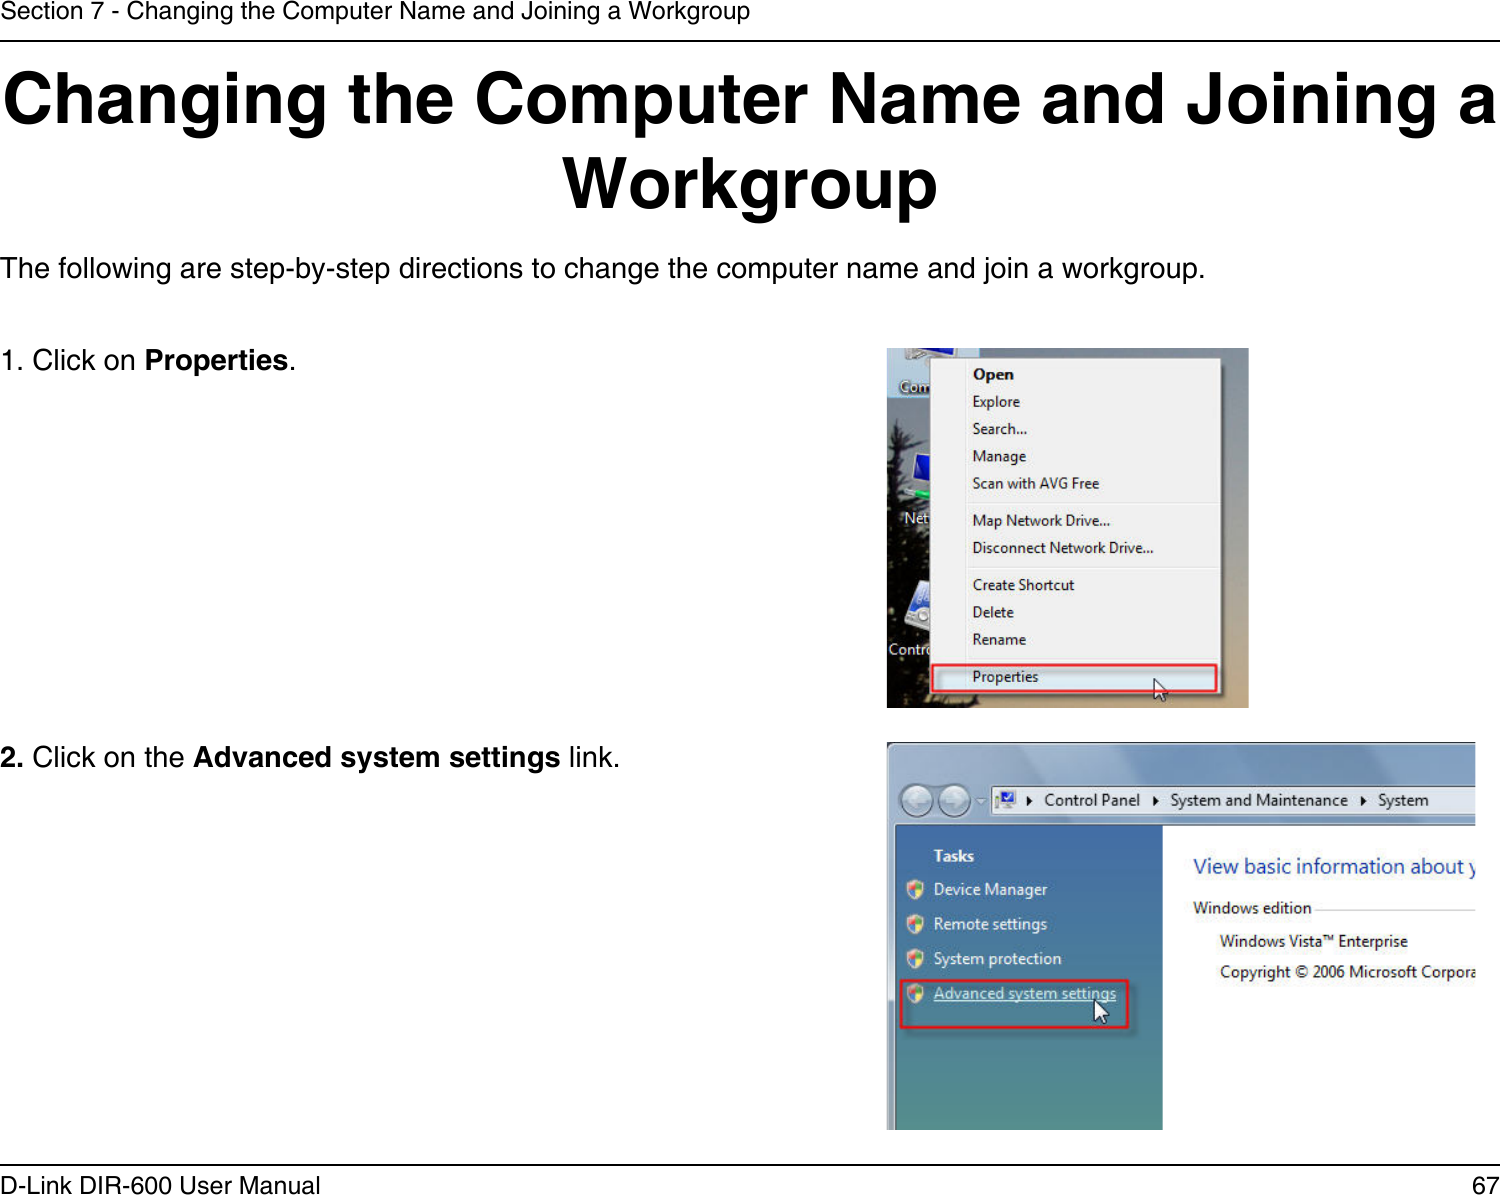 67D-Link DIR-600 User ManualSection 7 - Changing the Computer Name and Joining a WorkgroupChanging the Computer Name and Joining a WorkgroupThe following are step-by-step directions to change the computer name and join a workgroup.      2. Click on the Advanced system settings link. 1. Click on Properties.     